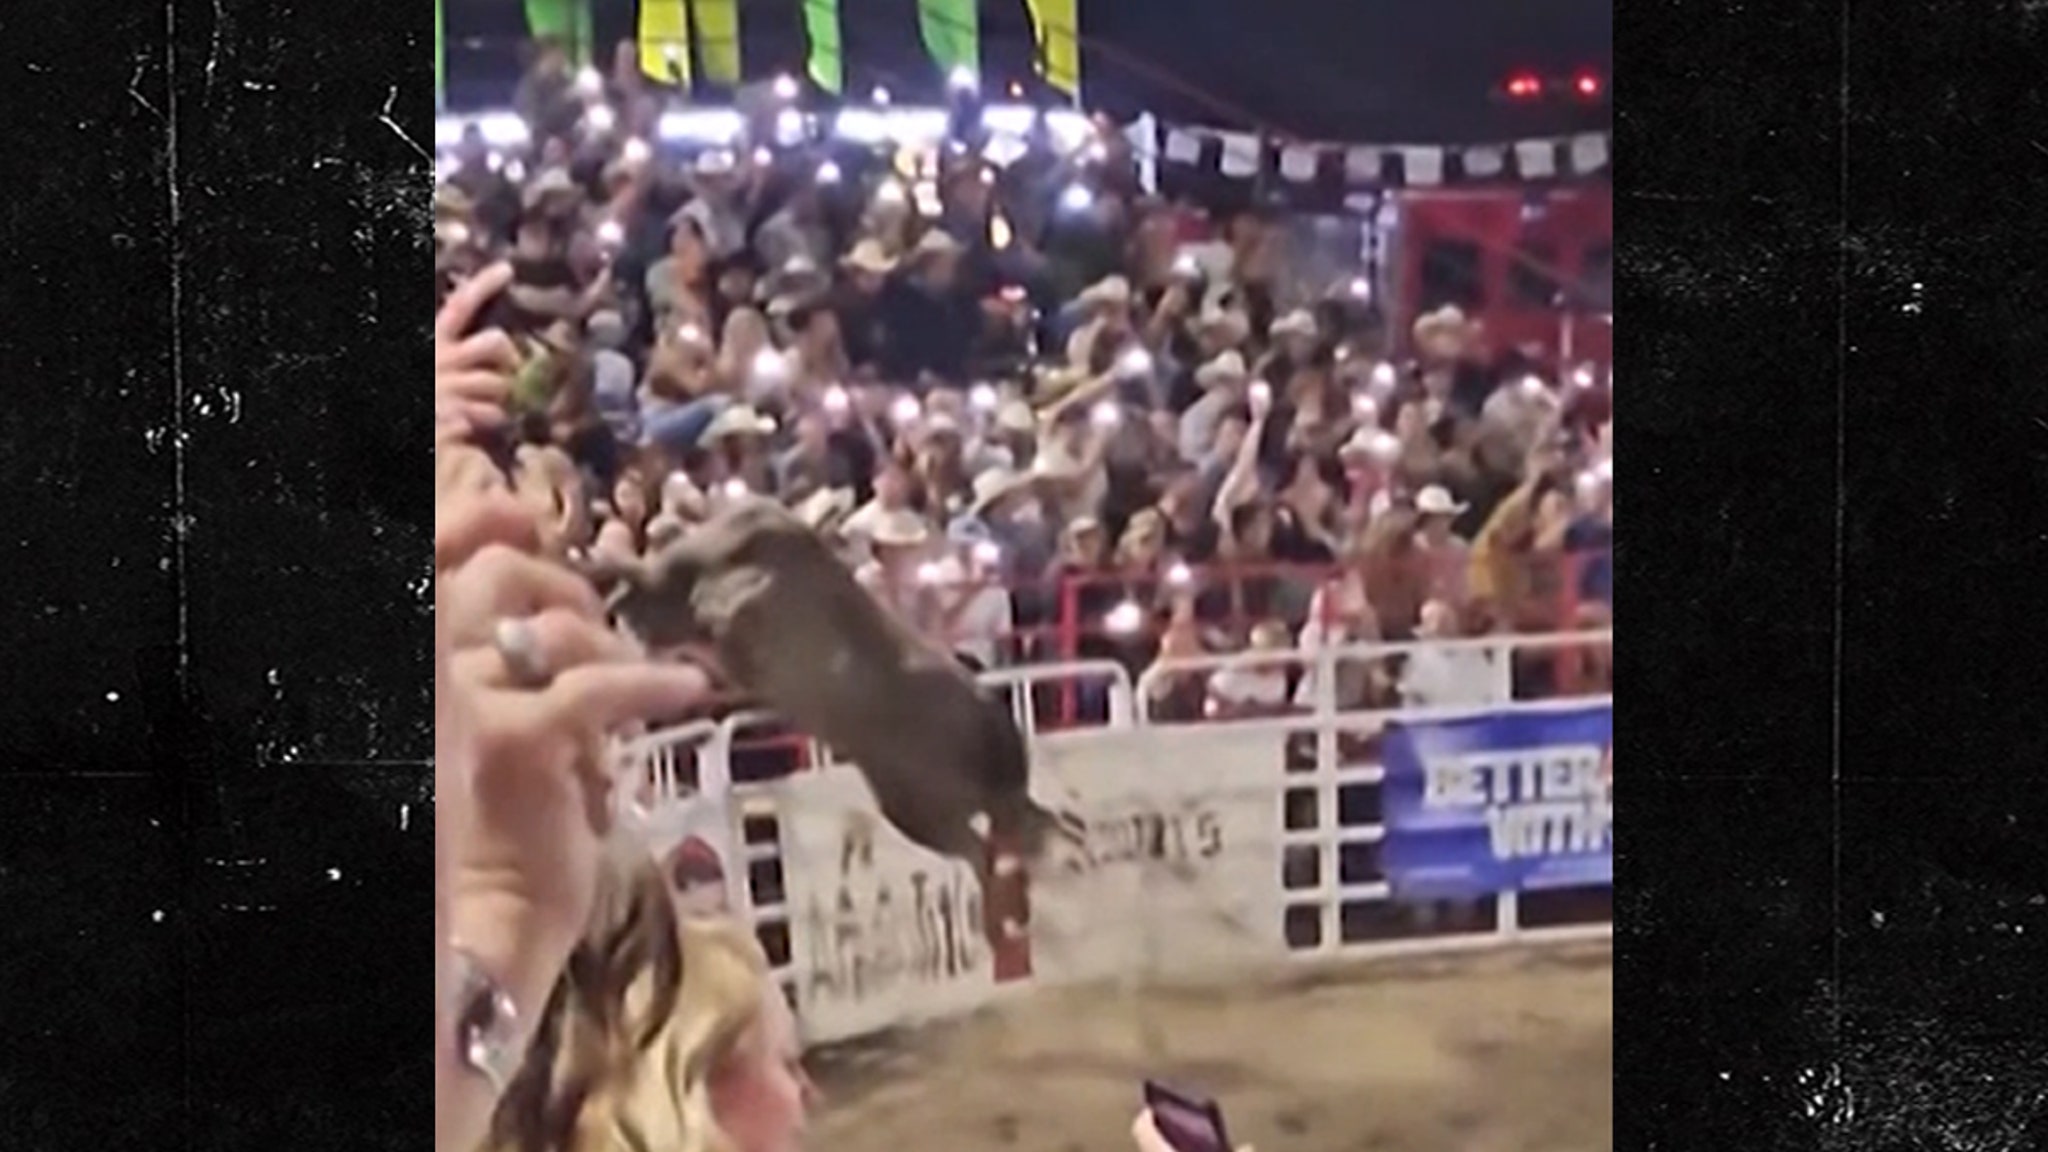 Oregon Rodeo Bull Won't Be Put Down Following Rampage, Officials Say